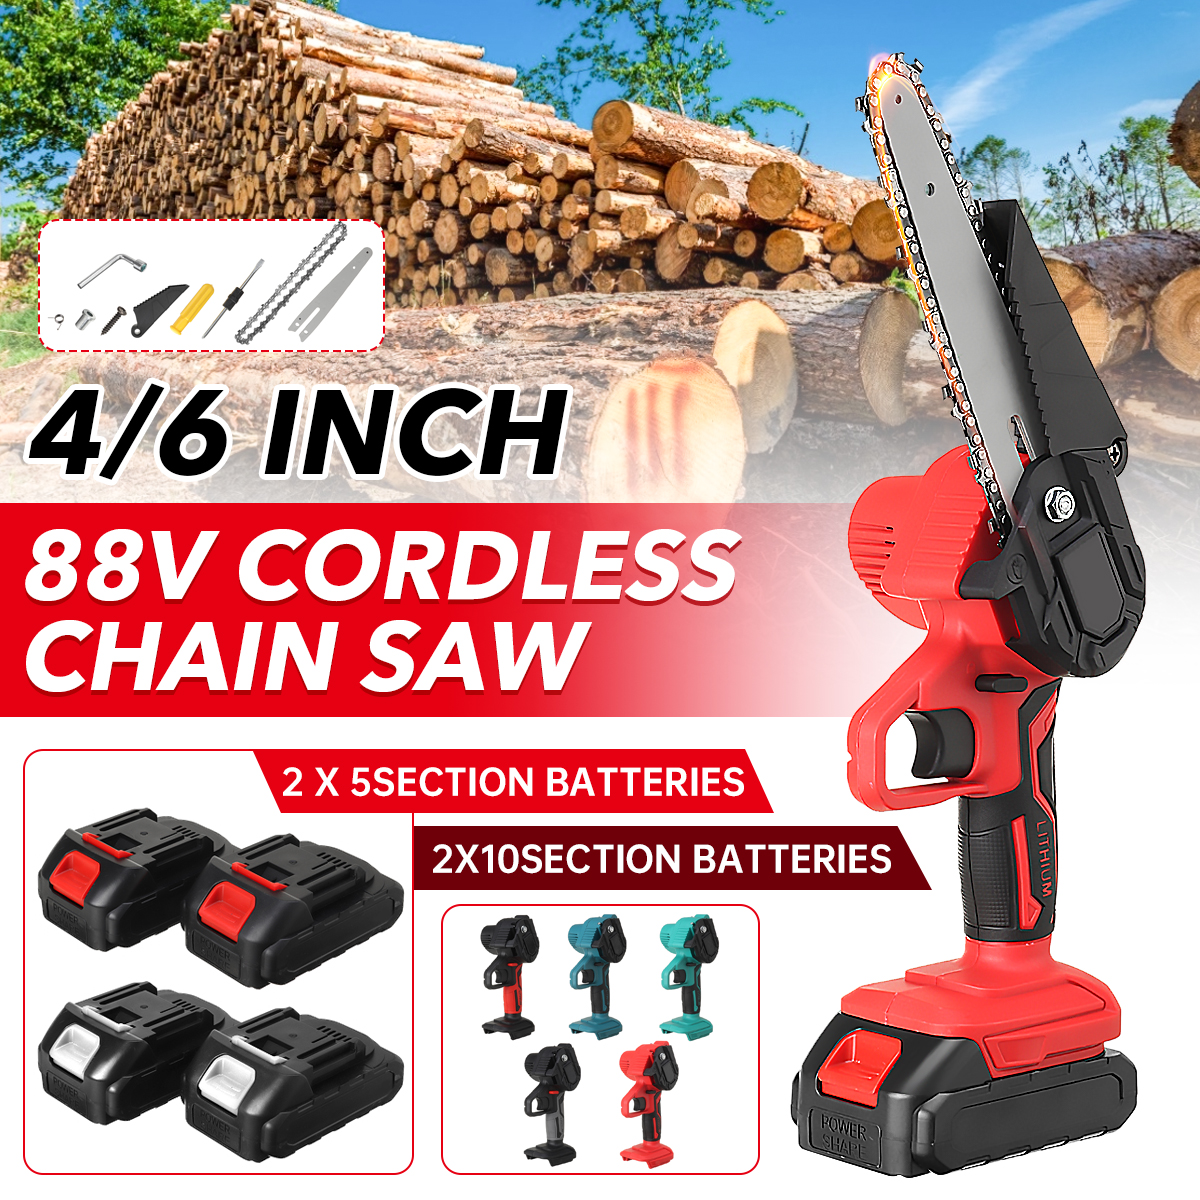 21V-46-Inch-Cordless-Electric-Chain-Saw-One-Hand-Saw-Mini-Portable-Woodworking-Wood-Cutter-W-2pcs-Ba-1880984-4